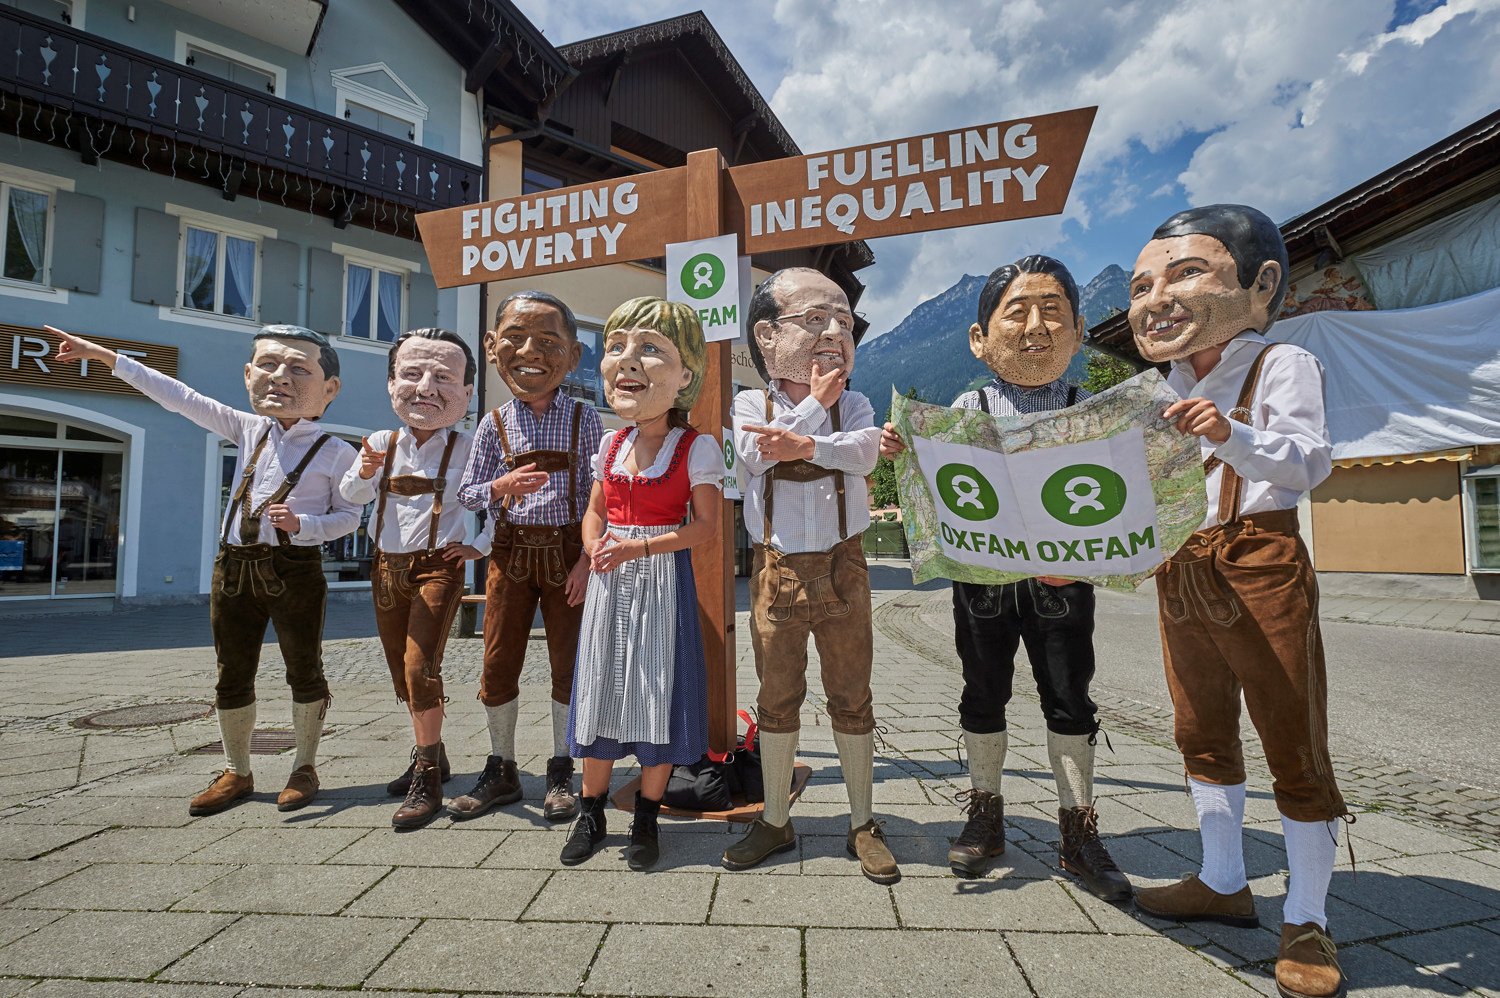 G7 leaders depicted with huge heads and kitted out with walking boots and maps must get on the right path to overcome poverty and inequality.